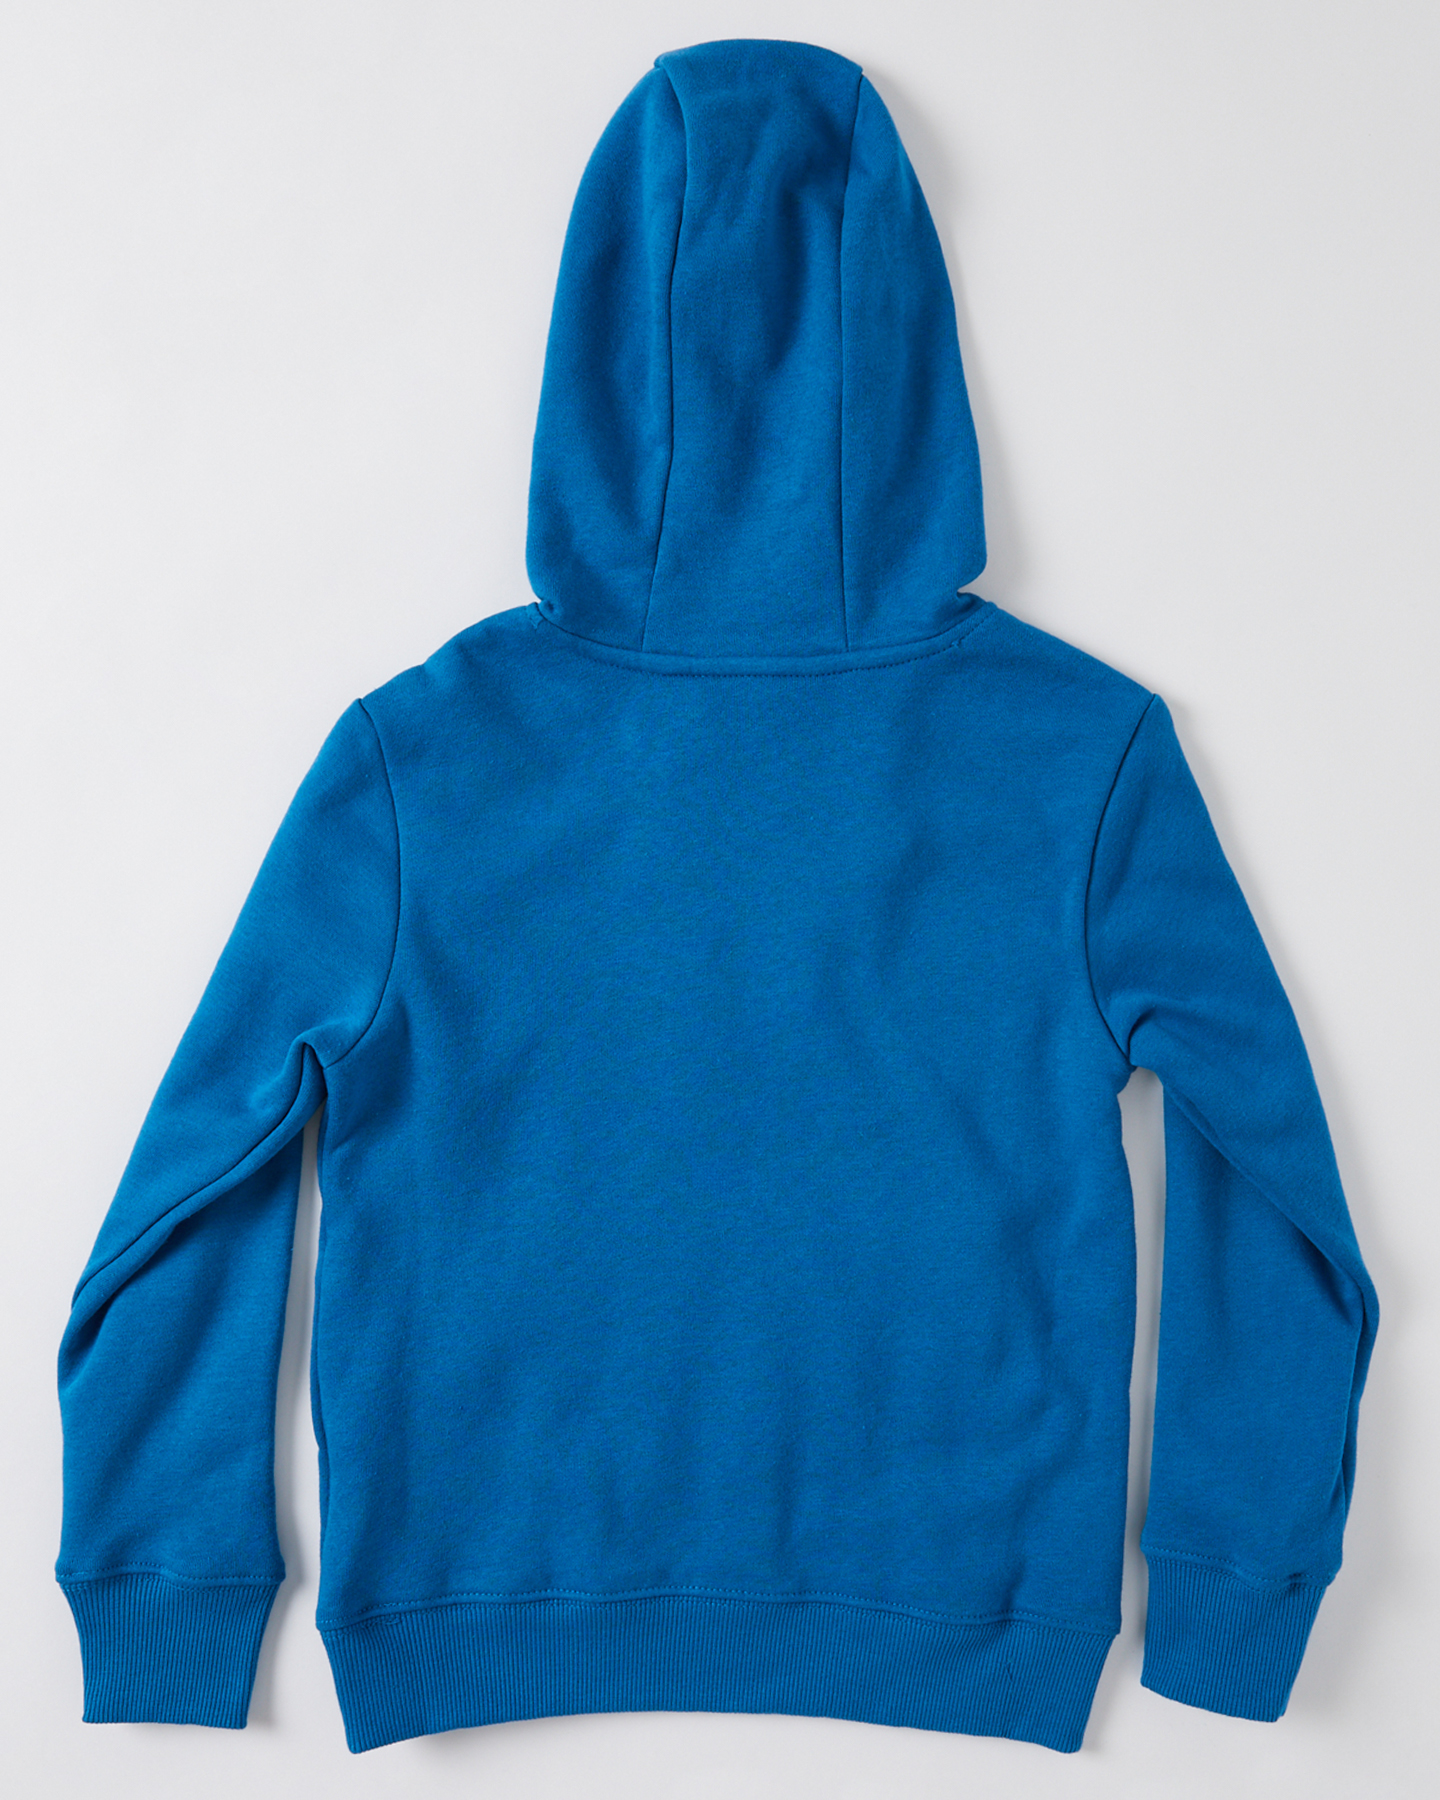 The North Face Boys Camp Fleece Pulover Hoodie - Teens - Banff Blue ...